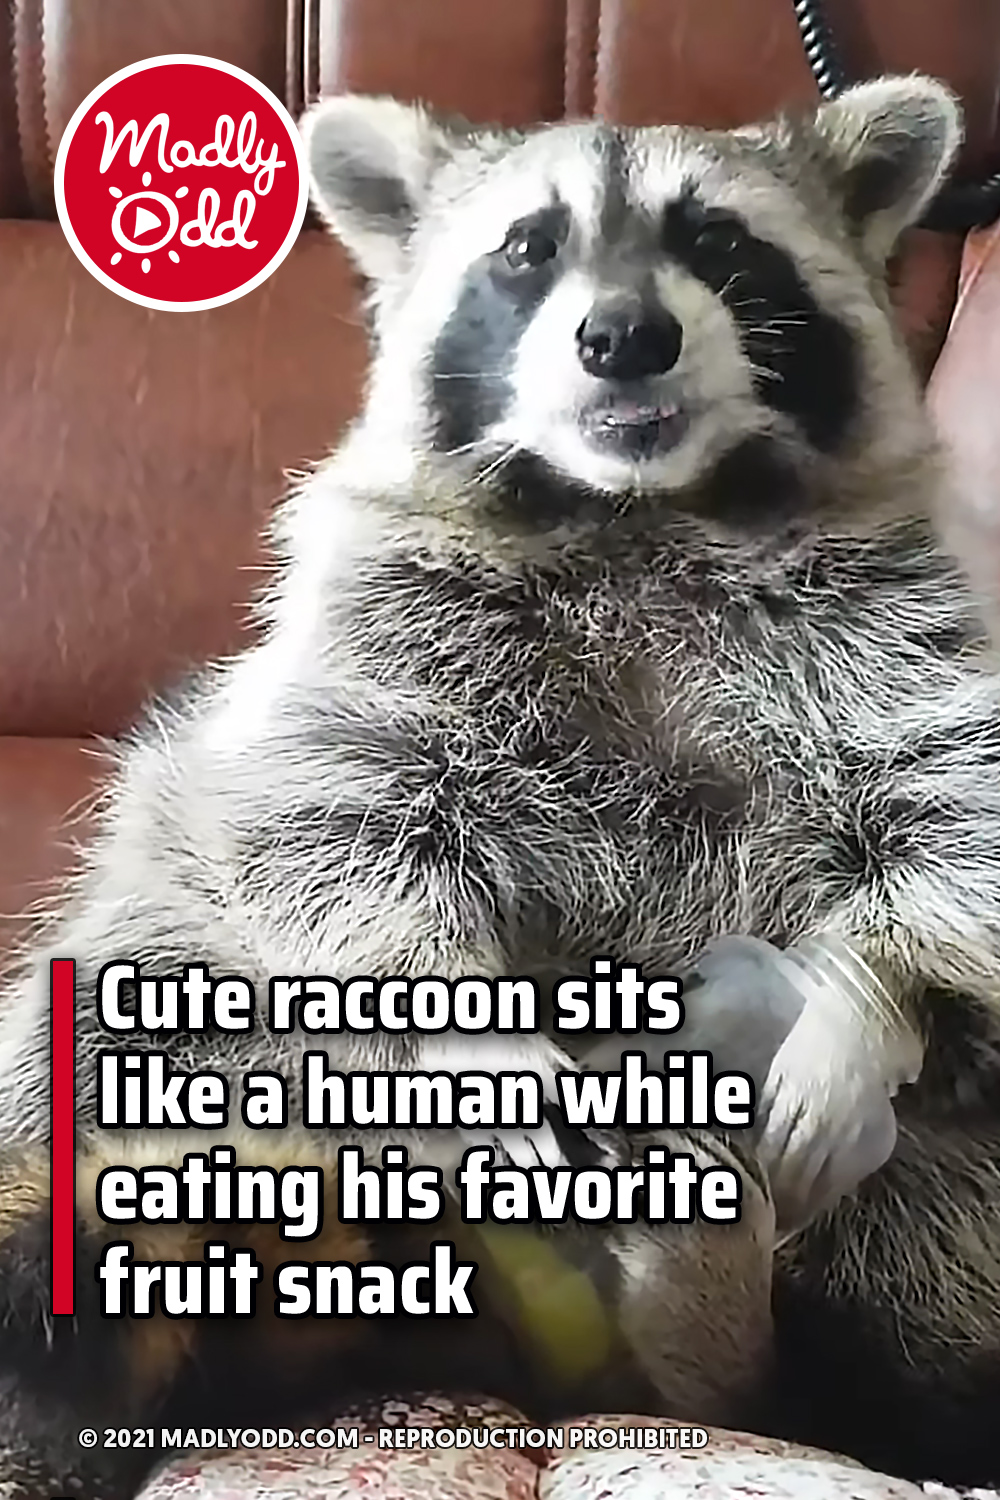 Cute raccoon sits like a human while eating his favorite fruit snack